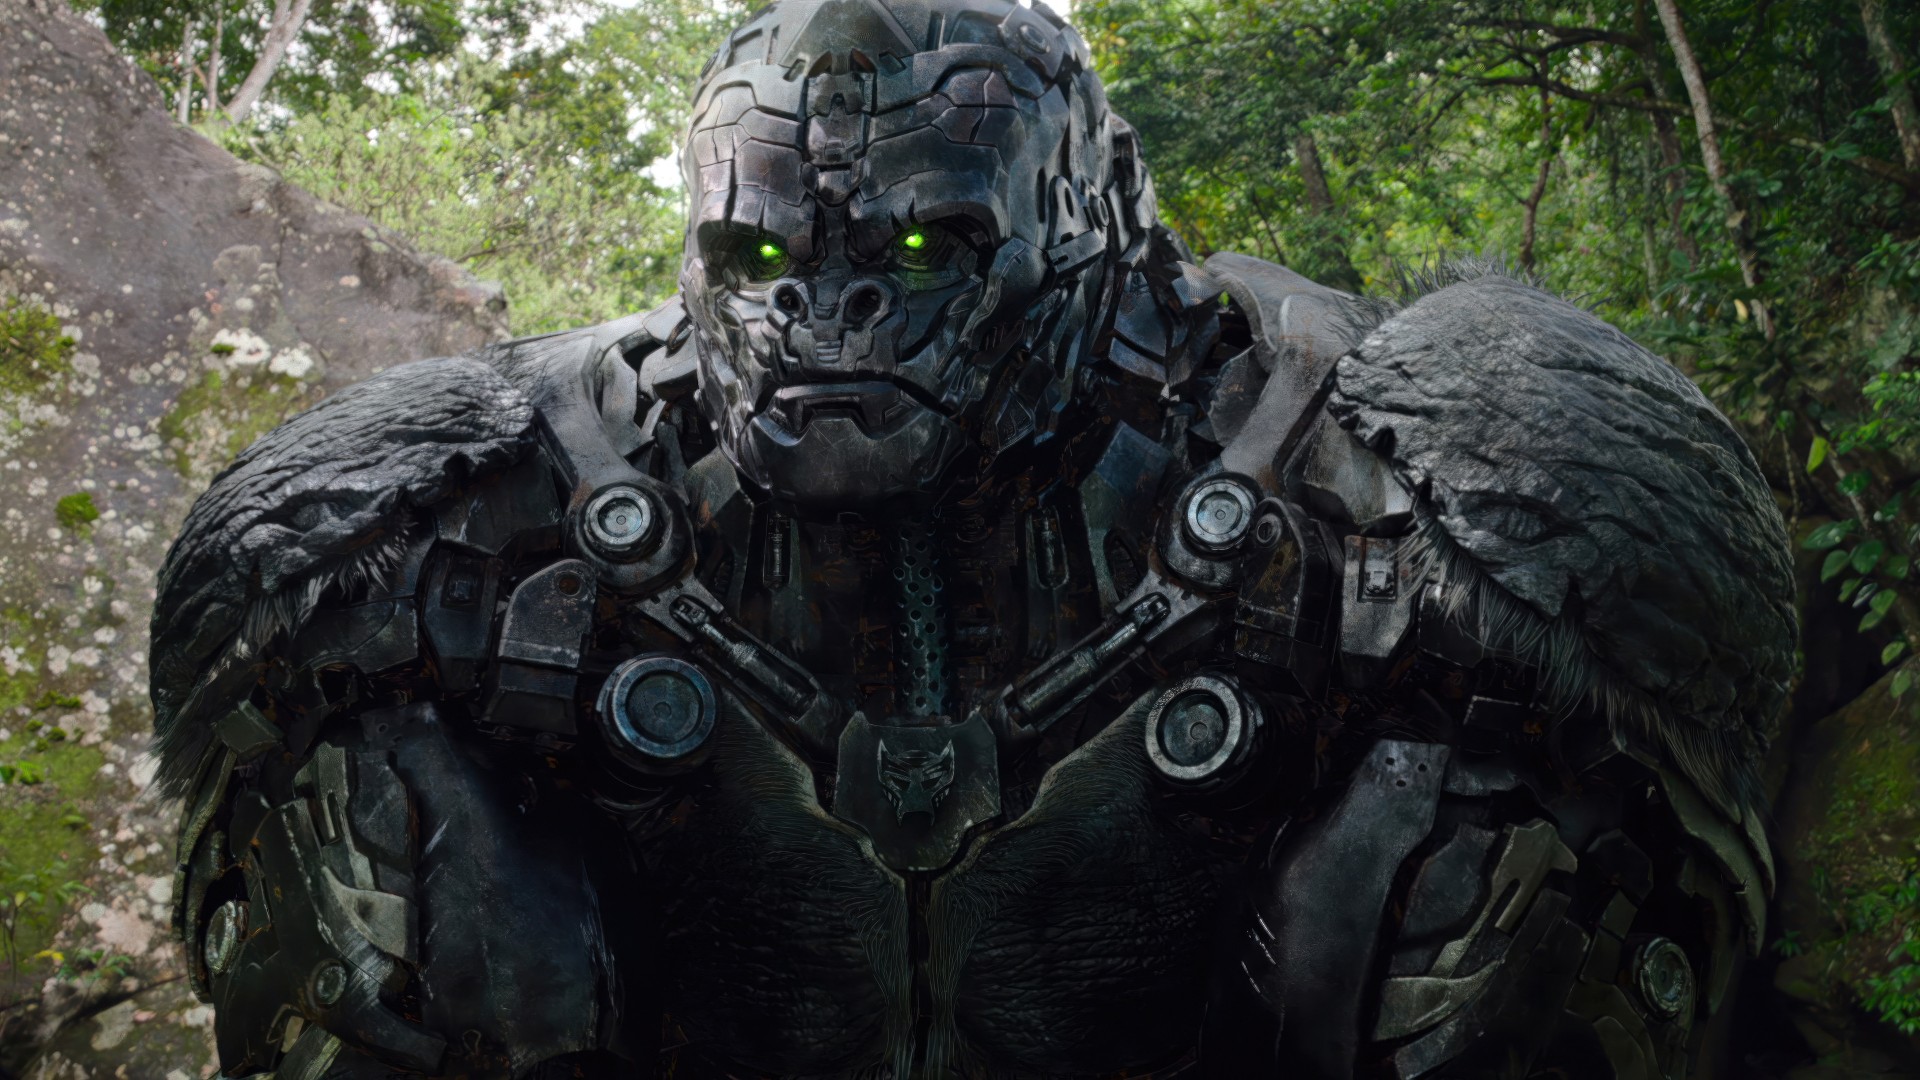 Transformers: Rise of the Beasts Box Office Opening Weekend Estimate